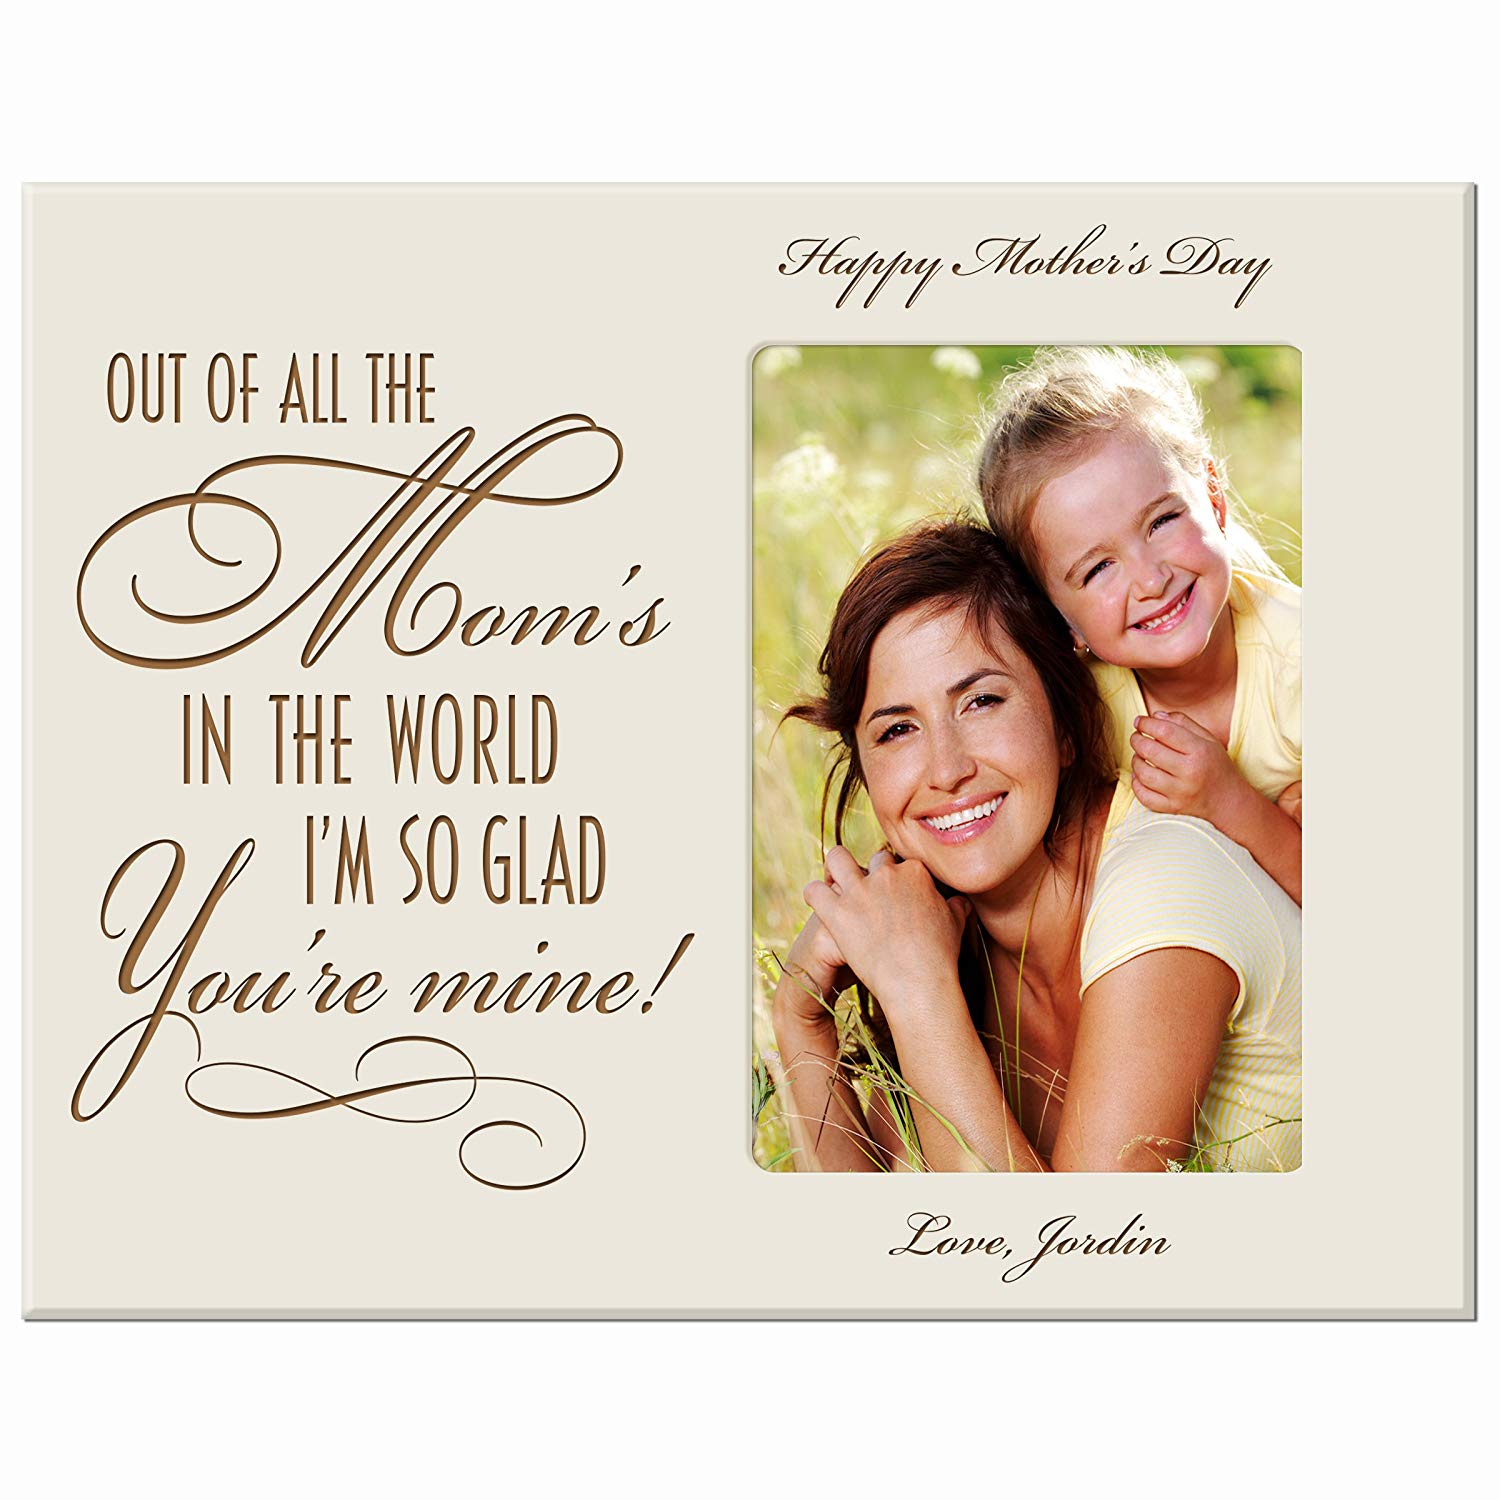 Personalized Happy Mother's Day Photo Frame - Out Of All The Mom's